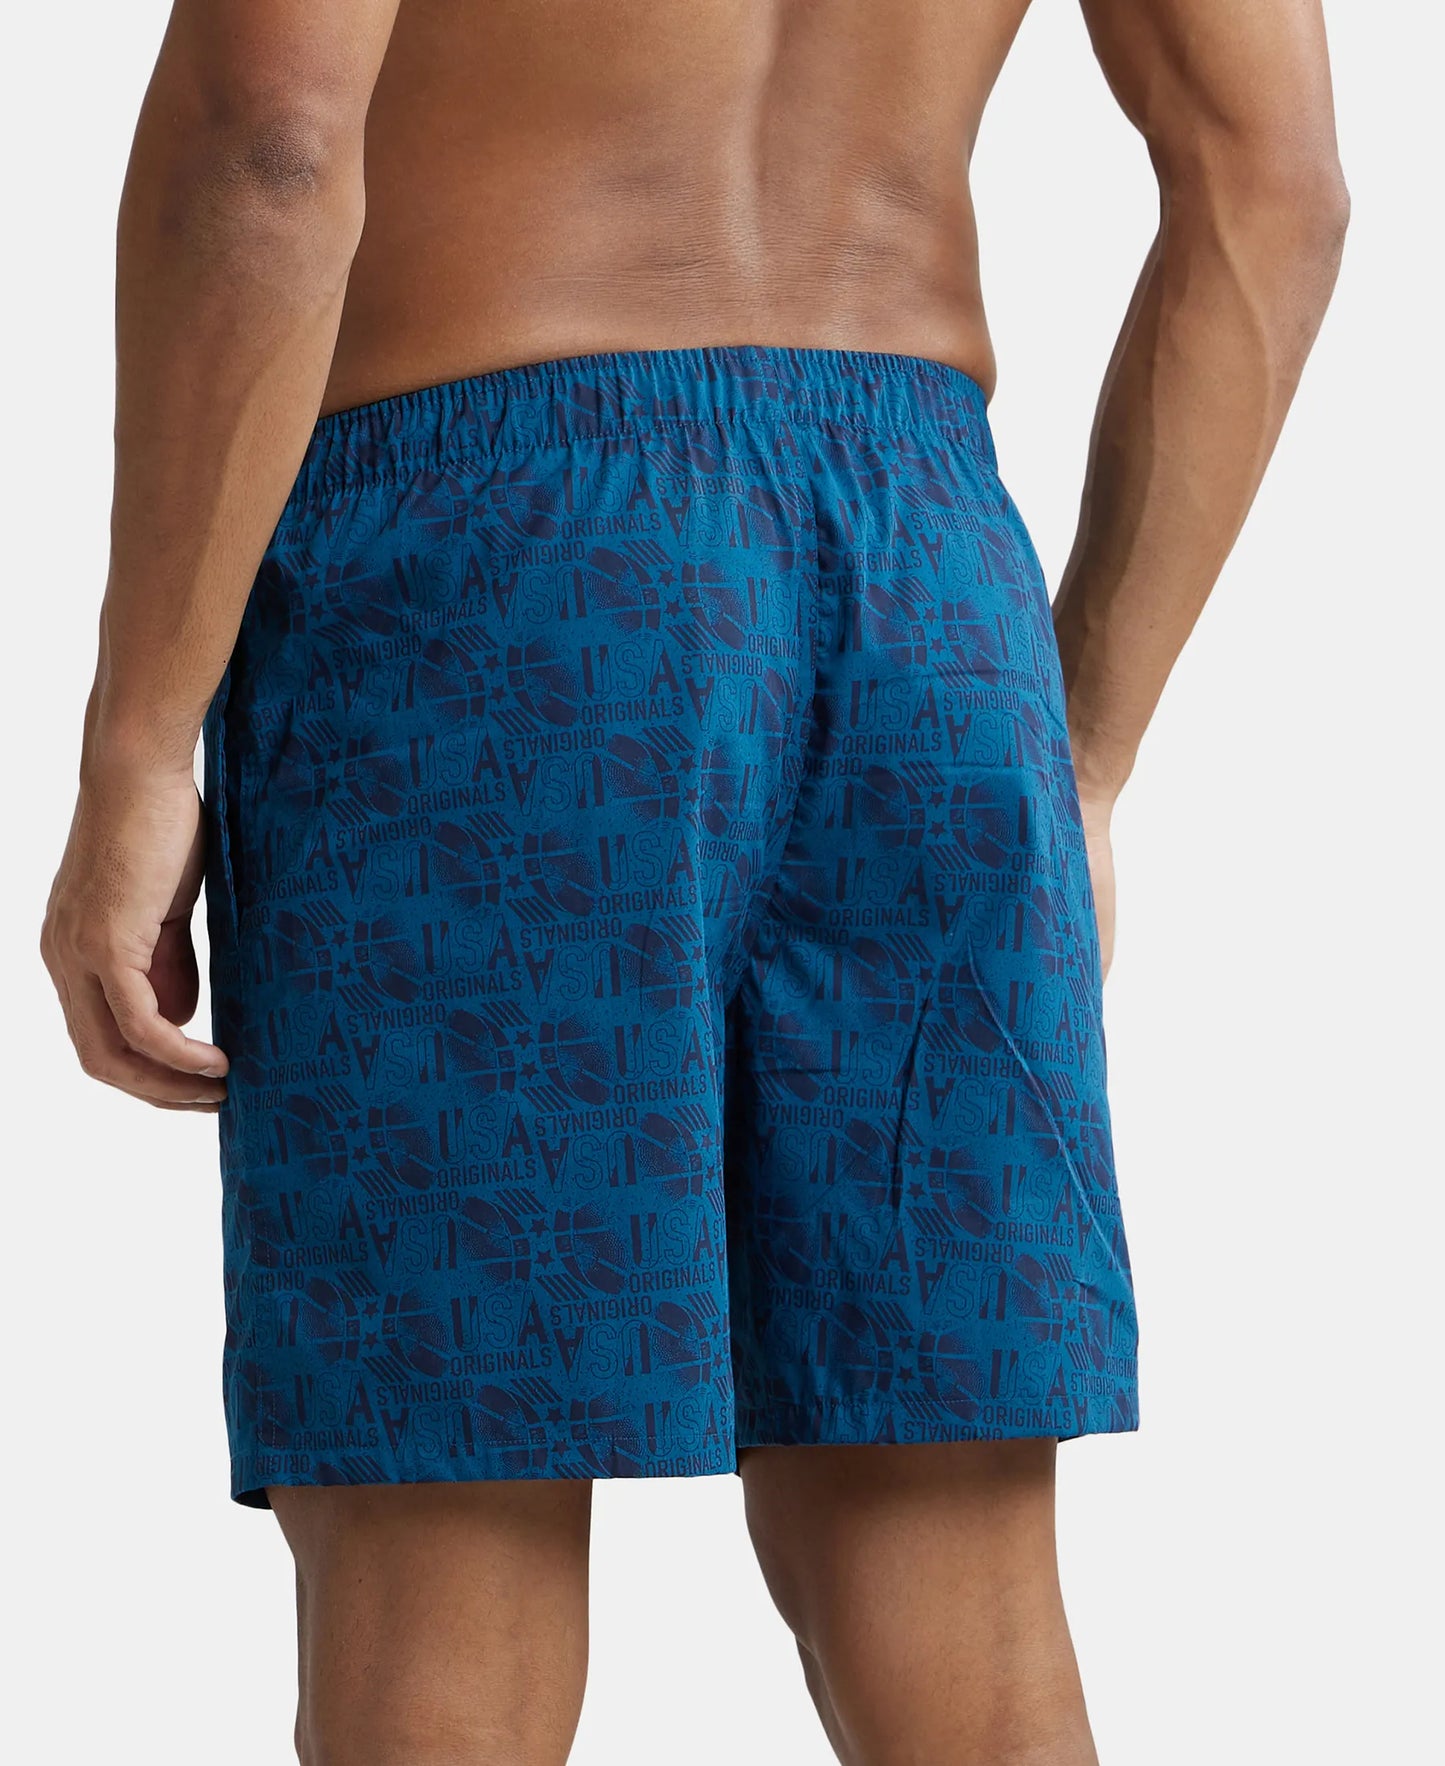 Super Combed Mercerized Cotton Woven Printed Boxer Shorts with Side Pocket - Seaport Teal-3